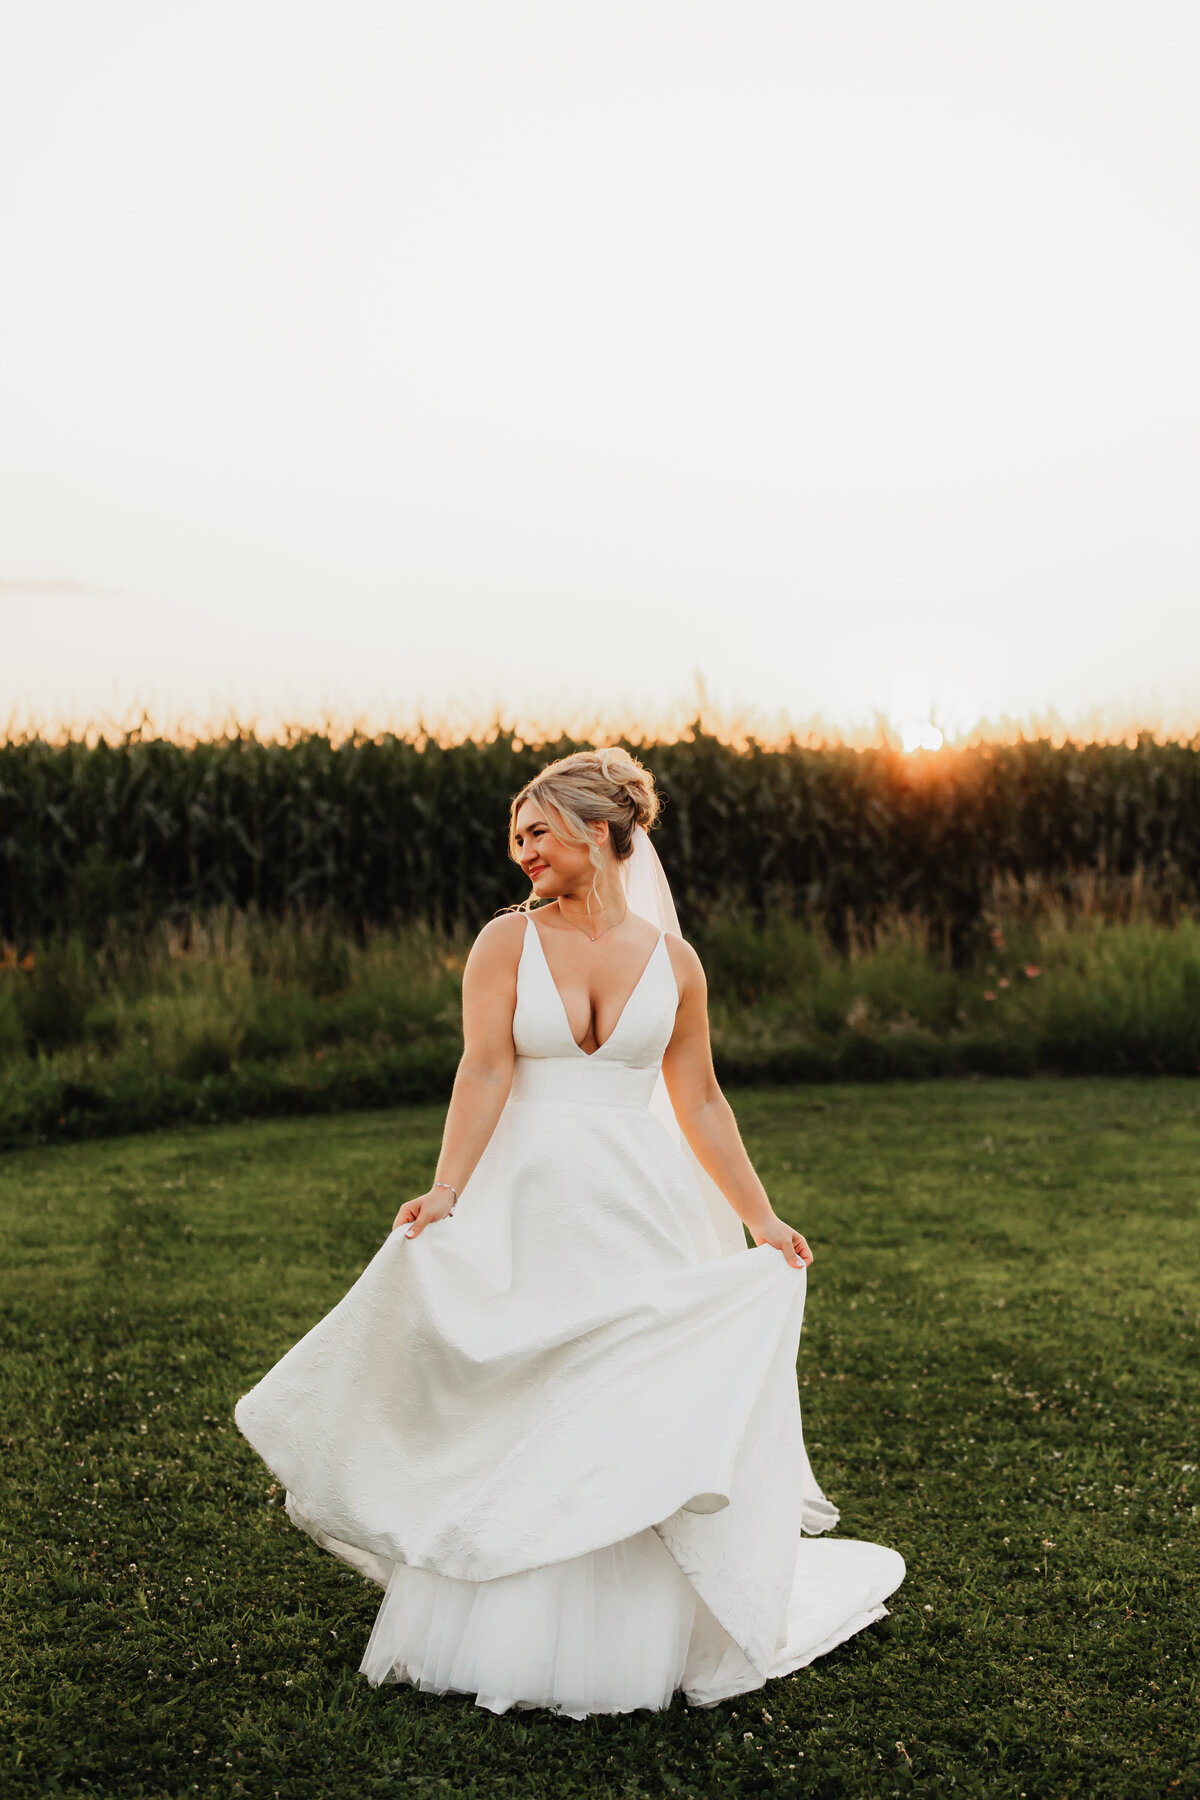 A bride looks out into a field while dancing in front of a corn field.